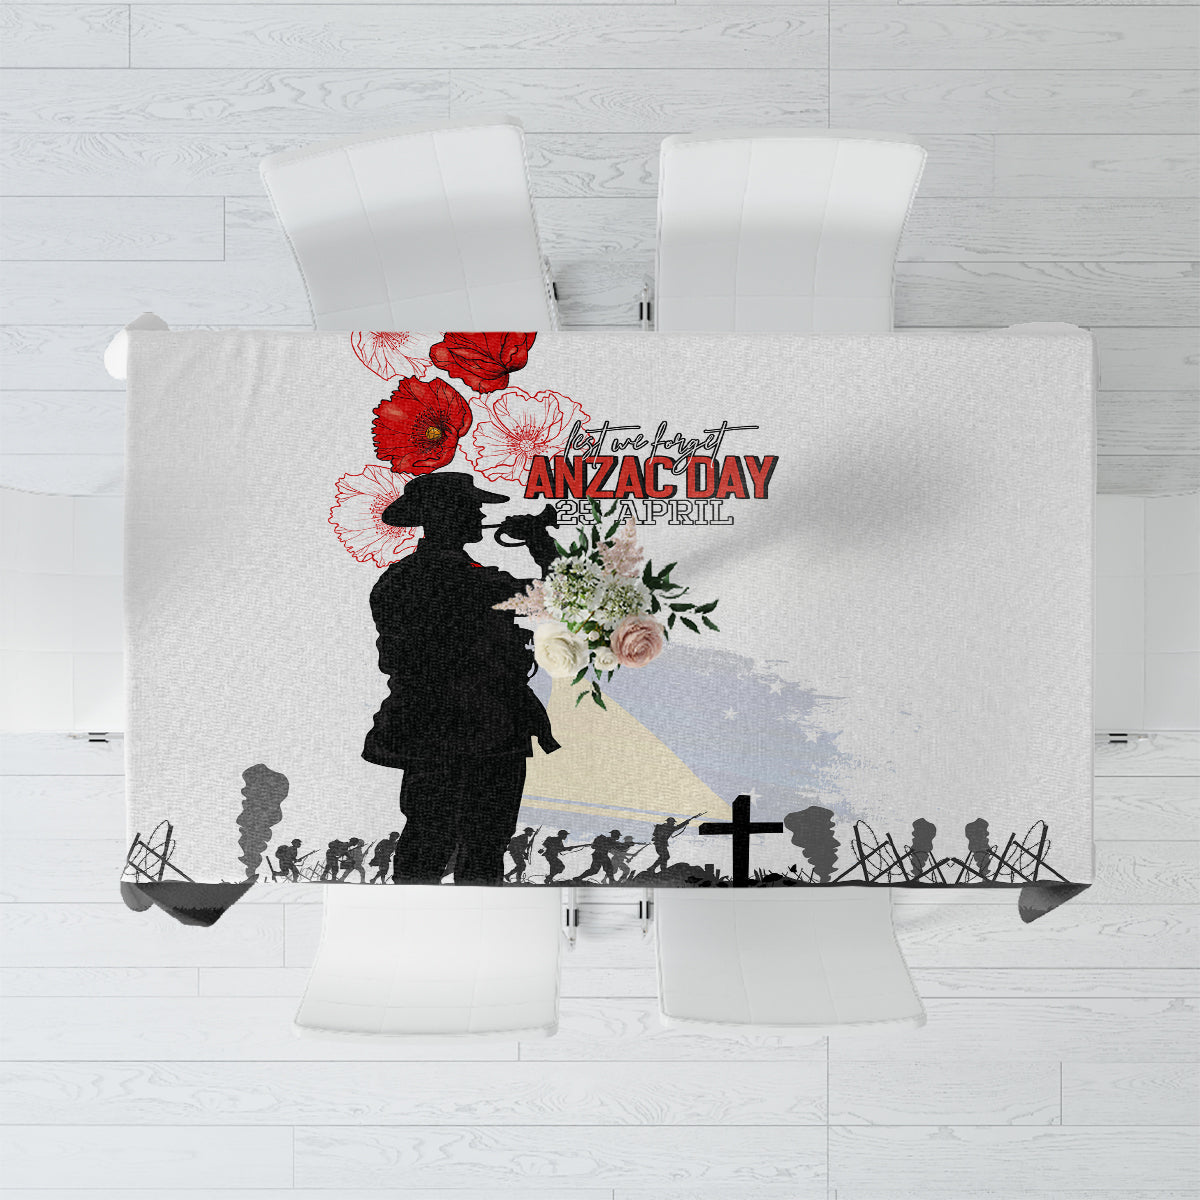 Tokelau ANZAC Day Tablecloth Lest We Forget Red Poppy Flowers and Soldier LT03 White - Polynesian Pride